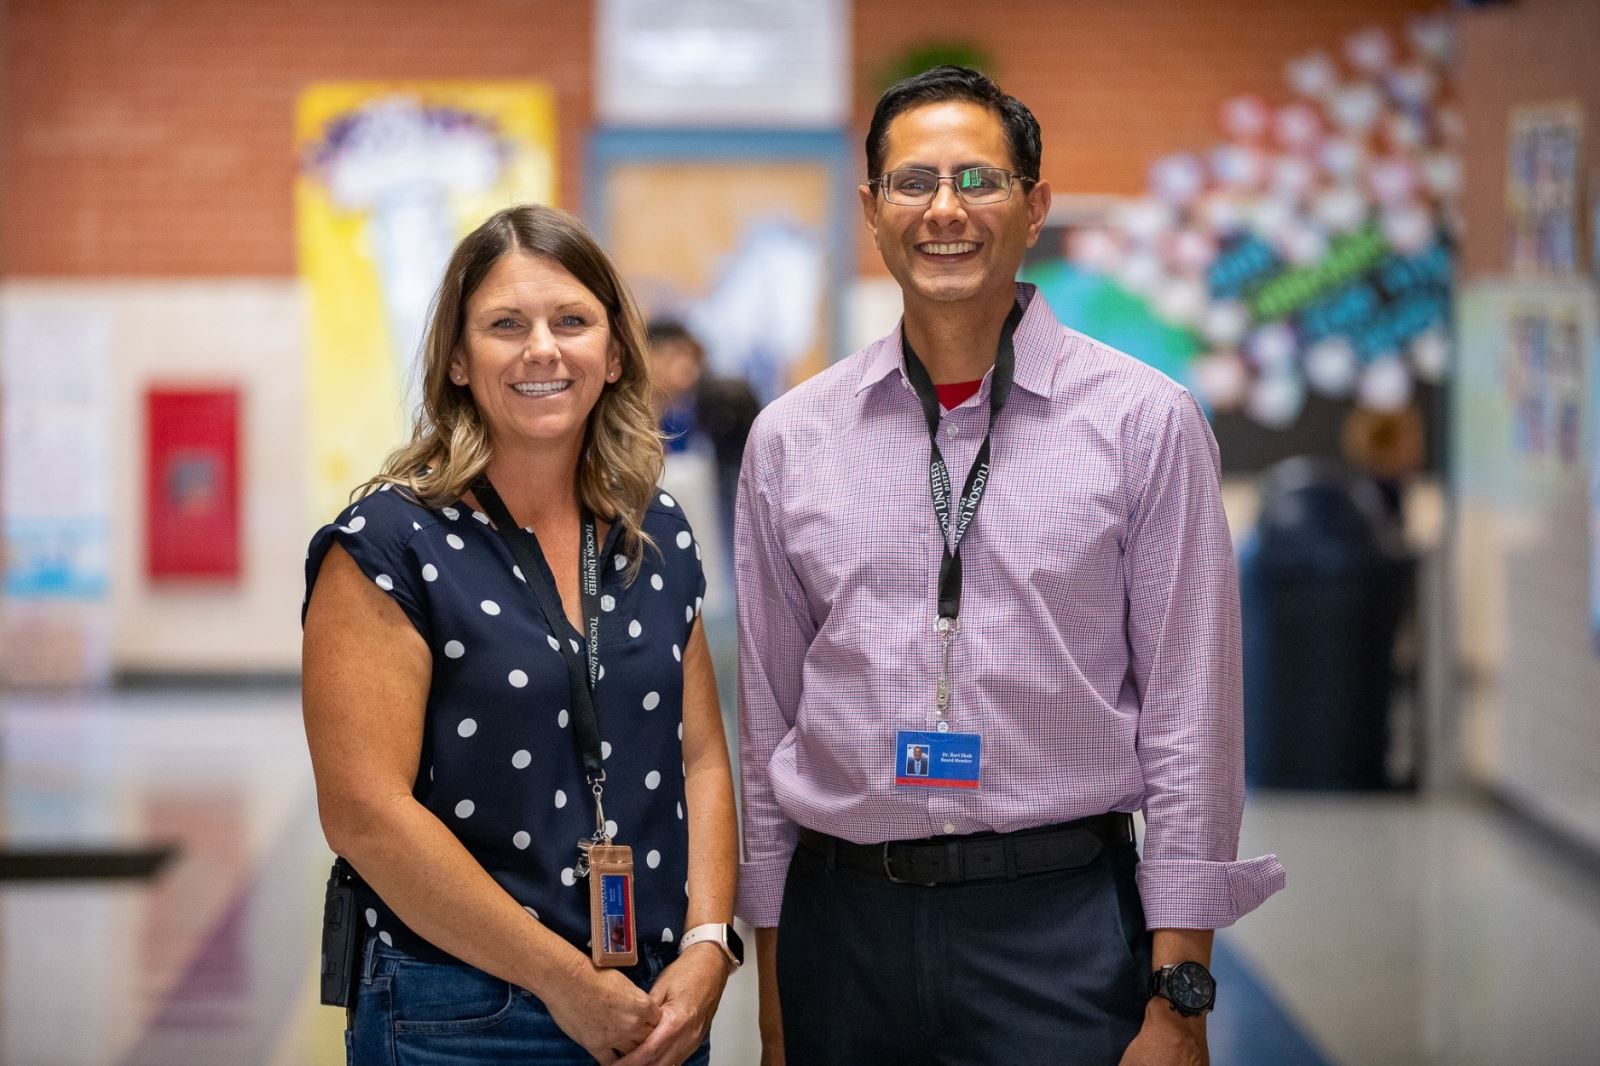 Marshall Principal Emily Seuss and Governing Board President Dr. Ravi Shah smile in the hallway during his visit.